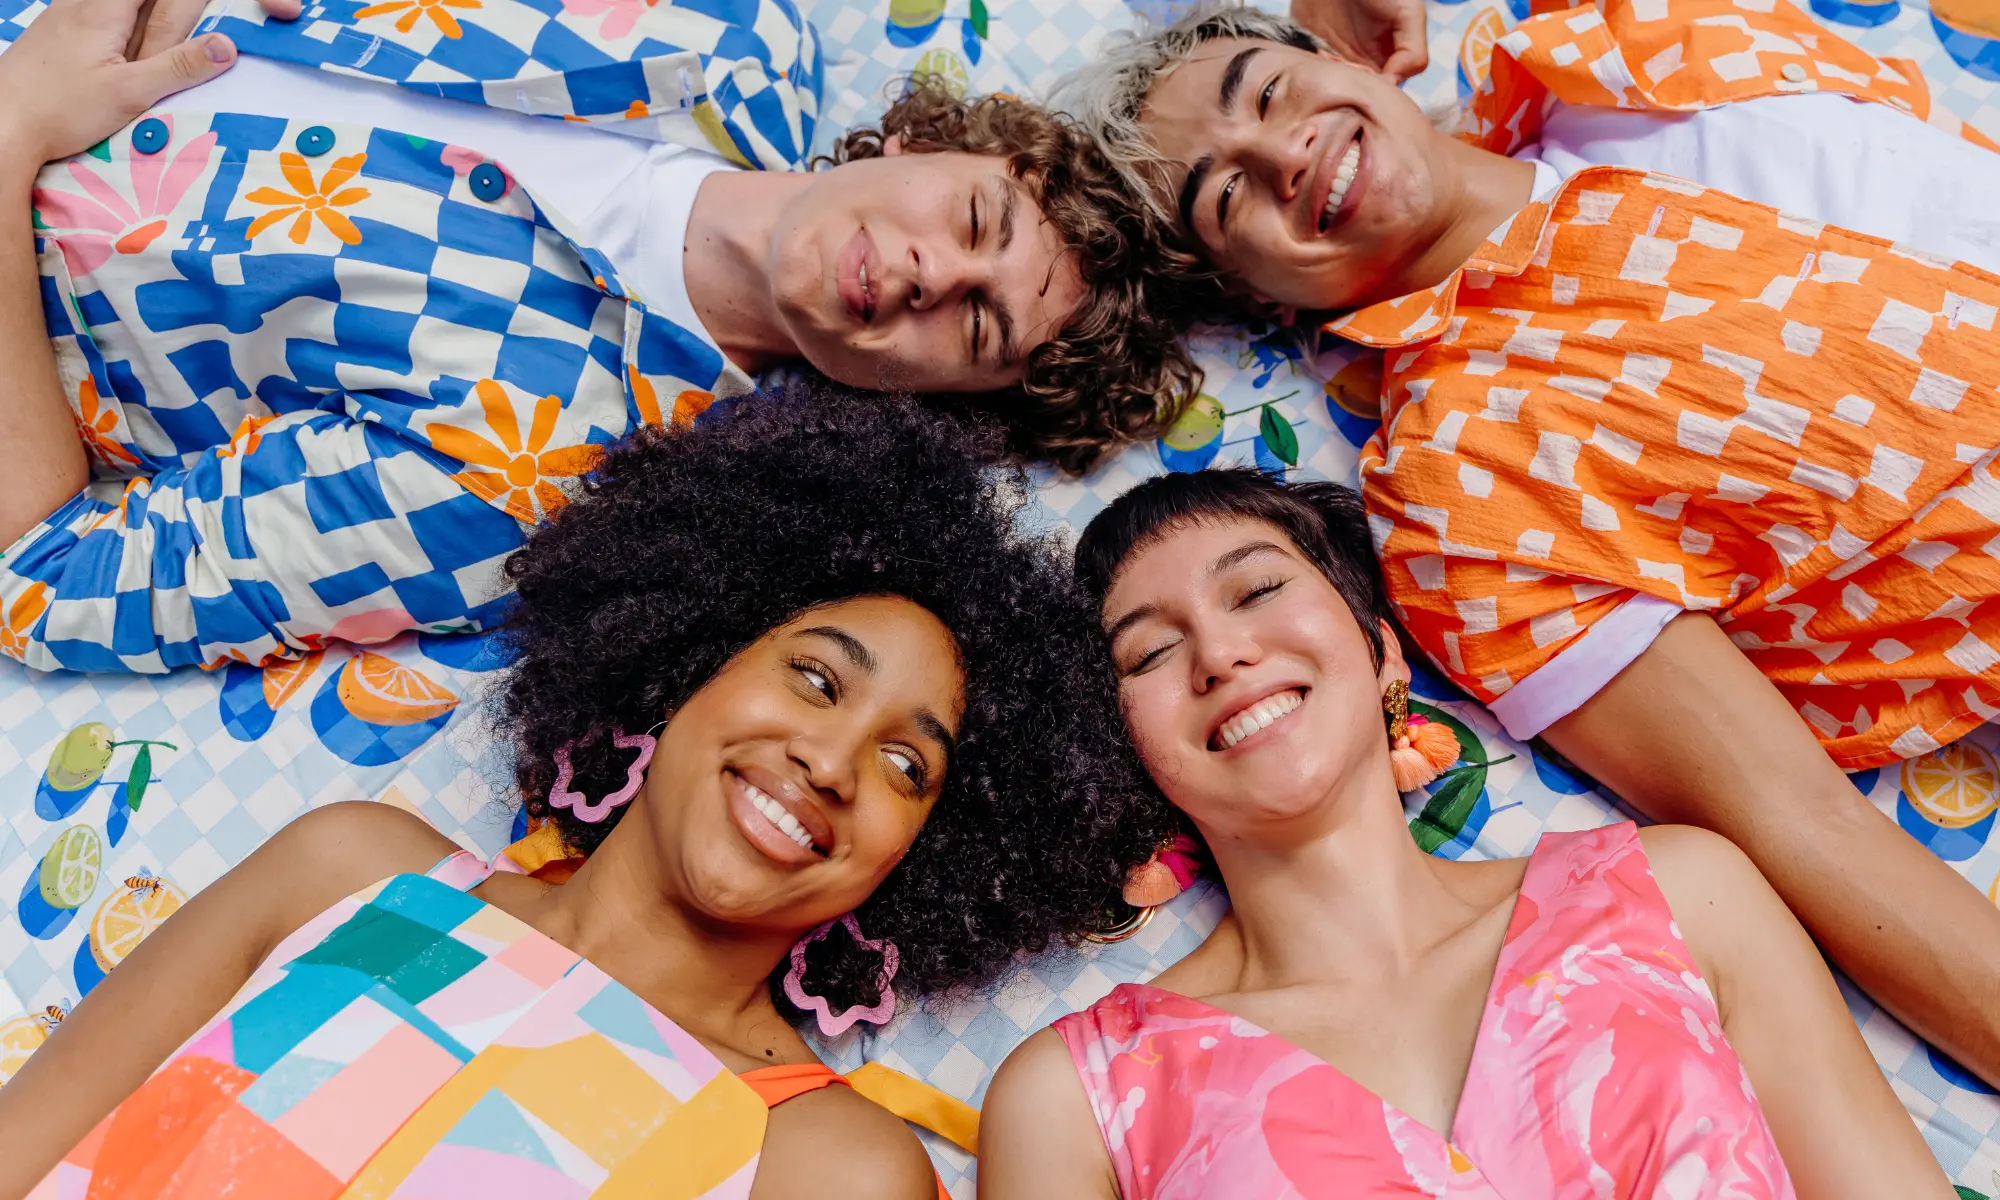 Smiling people in colorful summer clothing